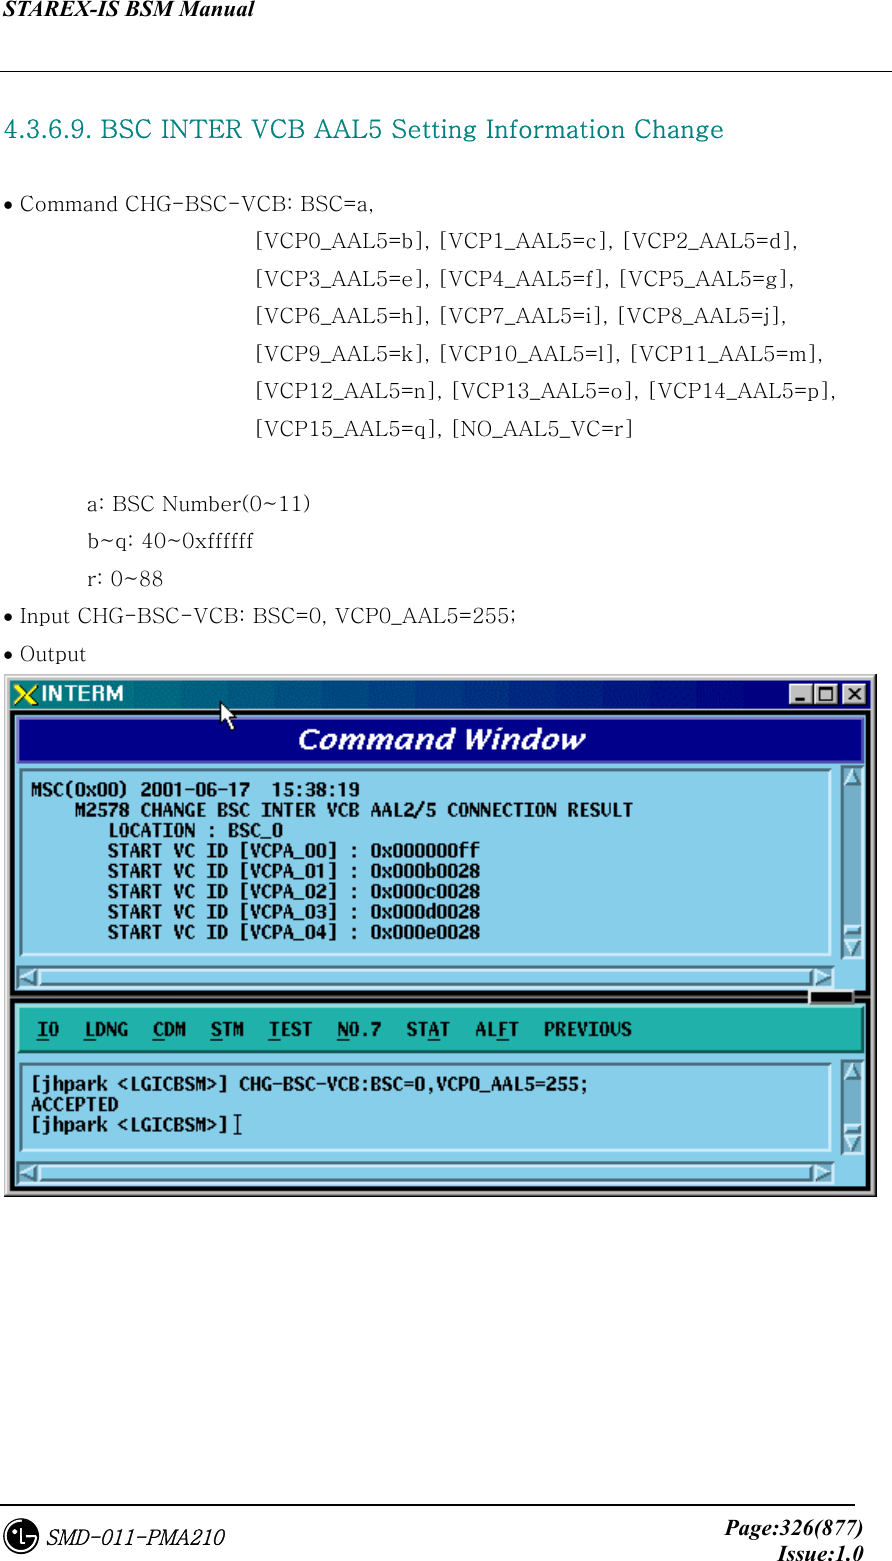 STAREX-IS BSM Manual     Page:326(877)Issue:1.0SMD-011-PMA210  4.3.6.9. BSC INTER VCB AAL5 Setting Information Change  • Command CHG-BSC-VCB: BSC=a,   [VCP0_AAL5=b], [VCP1_AAL5=c], [VCP2_AAL5=d],         [VCP3_AAL5=e], [VCP4_AAL5=f], [VCP5_AAL5=g],         [VCP6_AAL5=h], [VCP7_AAL5=i], [VCP8_AAL5=j],         [VCP9_AAL5=k], [VCP10_AAL5=l], [VCP11_AAL5=m],         [VCP12_AAL5=n], [VCP13_AAL5=o], [VCP14_AAL5=p],         [VCP15_AAL5=q], [NO_AAL5_VC=r]  a: BSC Number(0~11)         b~q: 40~0xffffff         r: 0~88 • Input CHG-BSC-VCB: BSC=0, VCP0_AAL5=255; • Output   